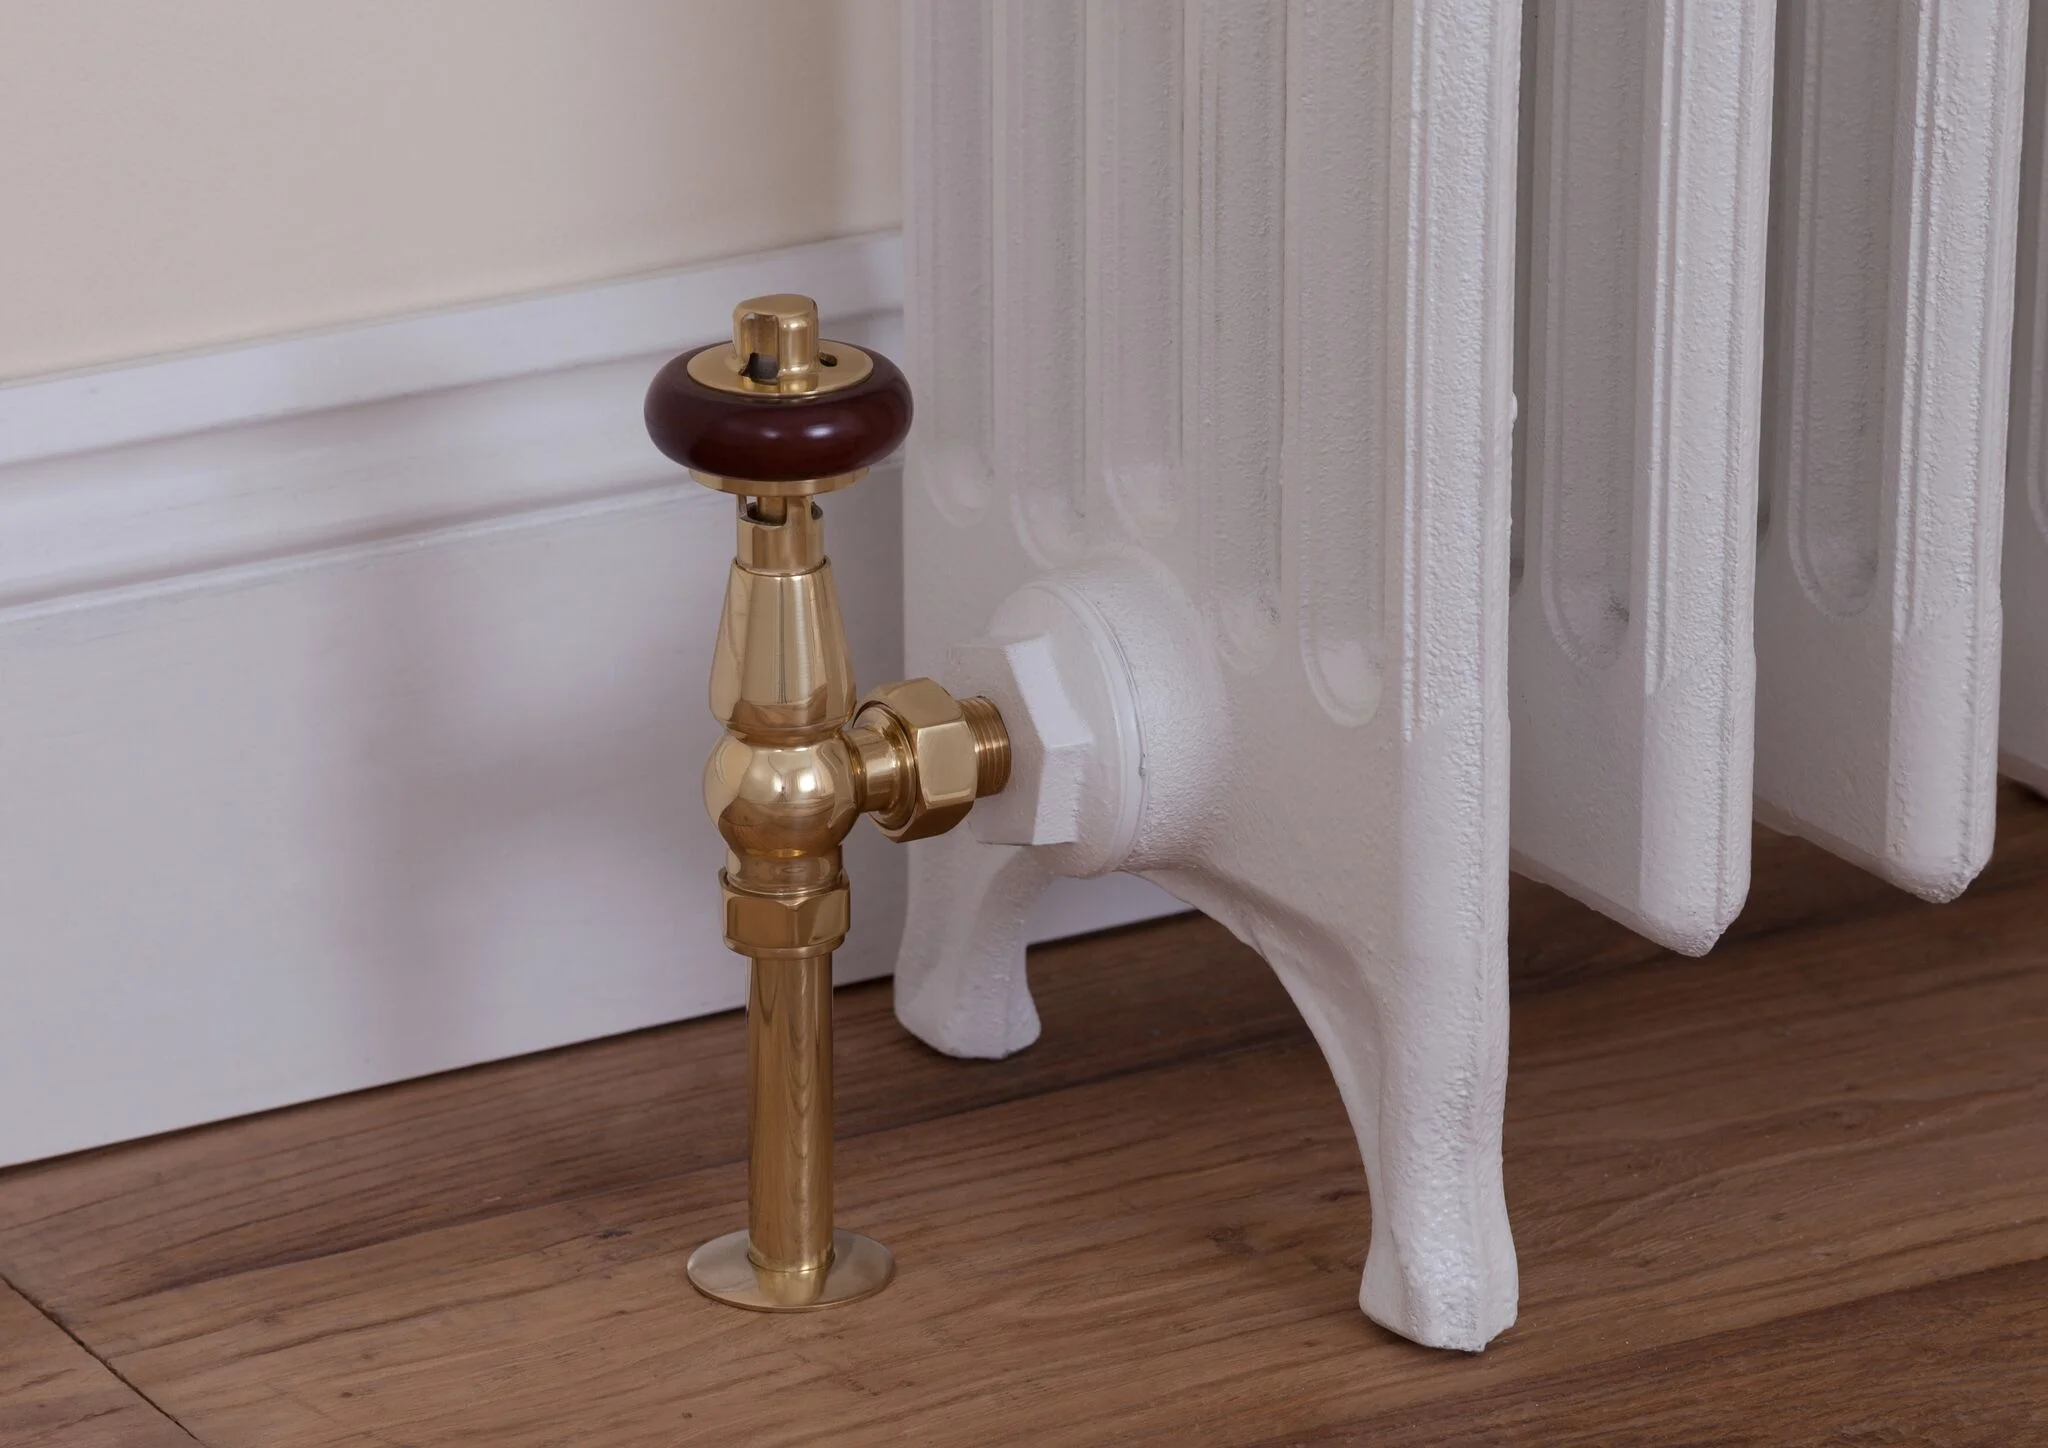 Kingsgrove 15mm Inlet Thermostatic Valve (Brass) Main4 Carron_Home Refresh